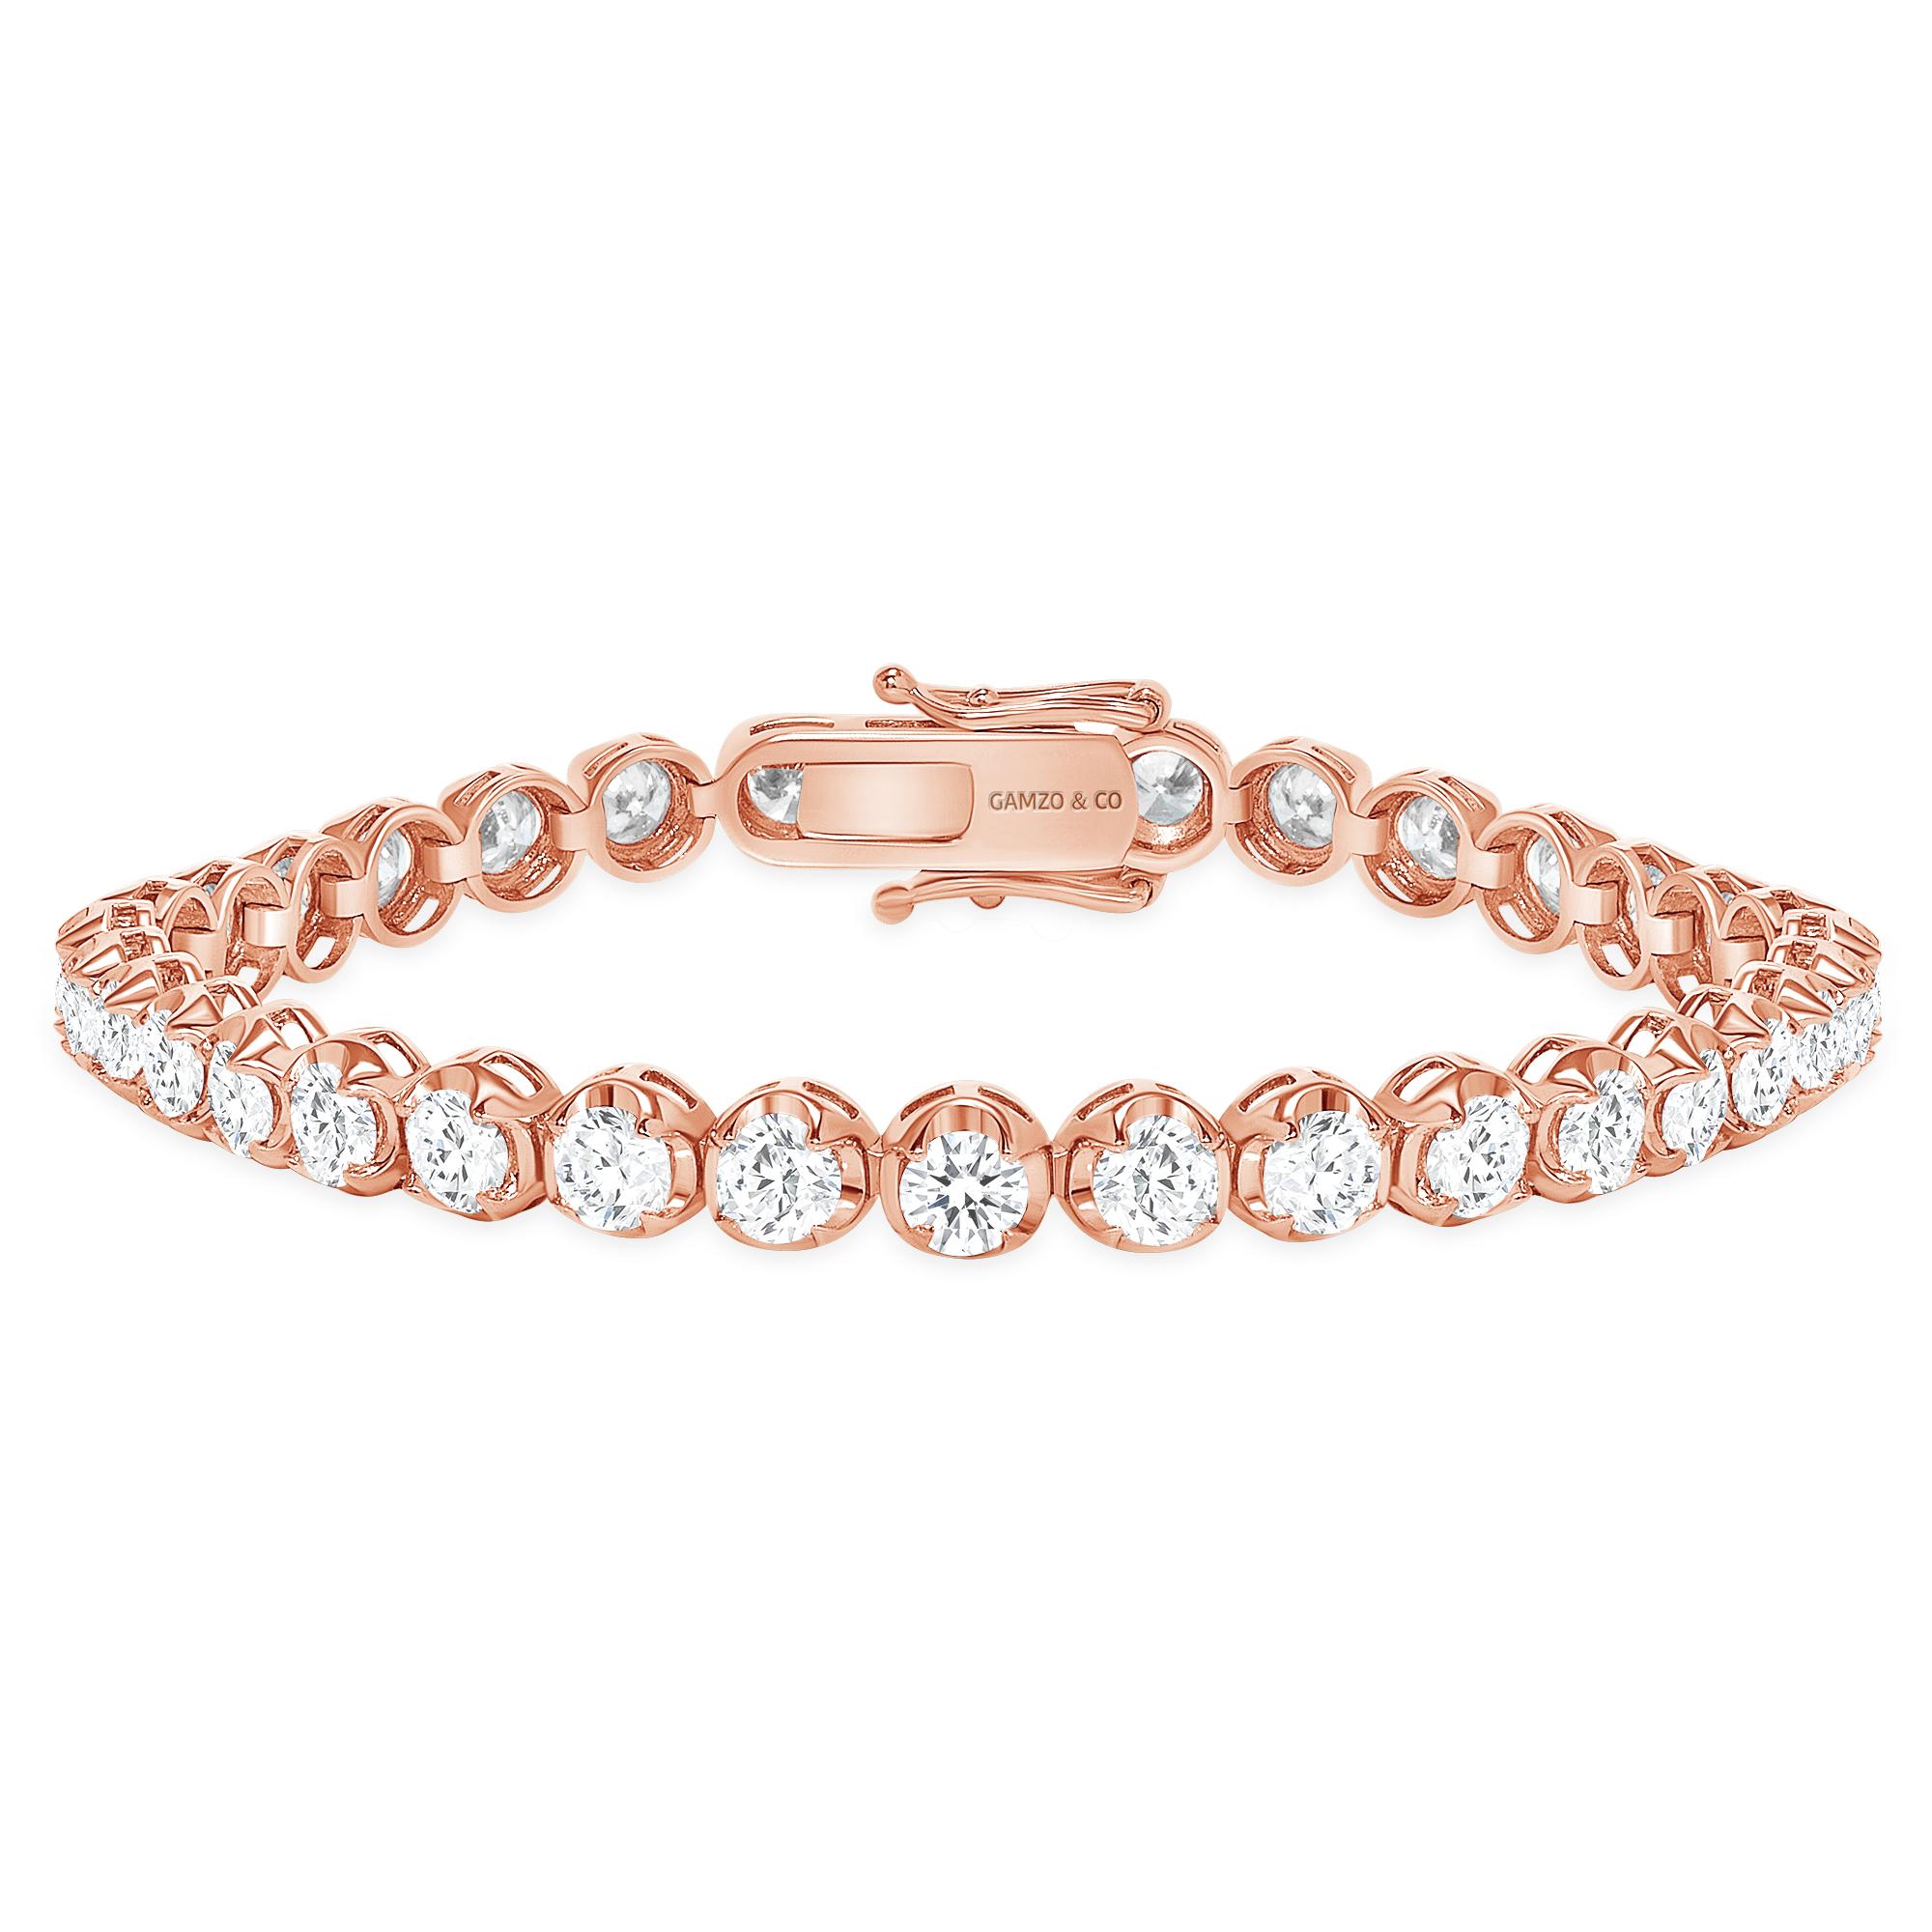 These beautiful round diamonds dance around your wrist as they absorb light and attention.
Metal: 14k Gold
Diamond Cut: Round
Diamond Total Carats: 5ct
Diamond Clarity: VS
Diamond Color: F
Color: Rose Gold
Bracelet Length: 6 Inches 
Included with